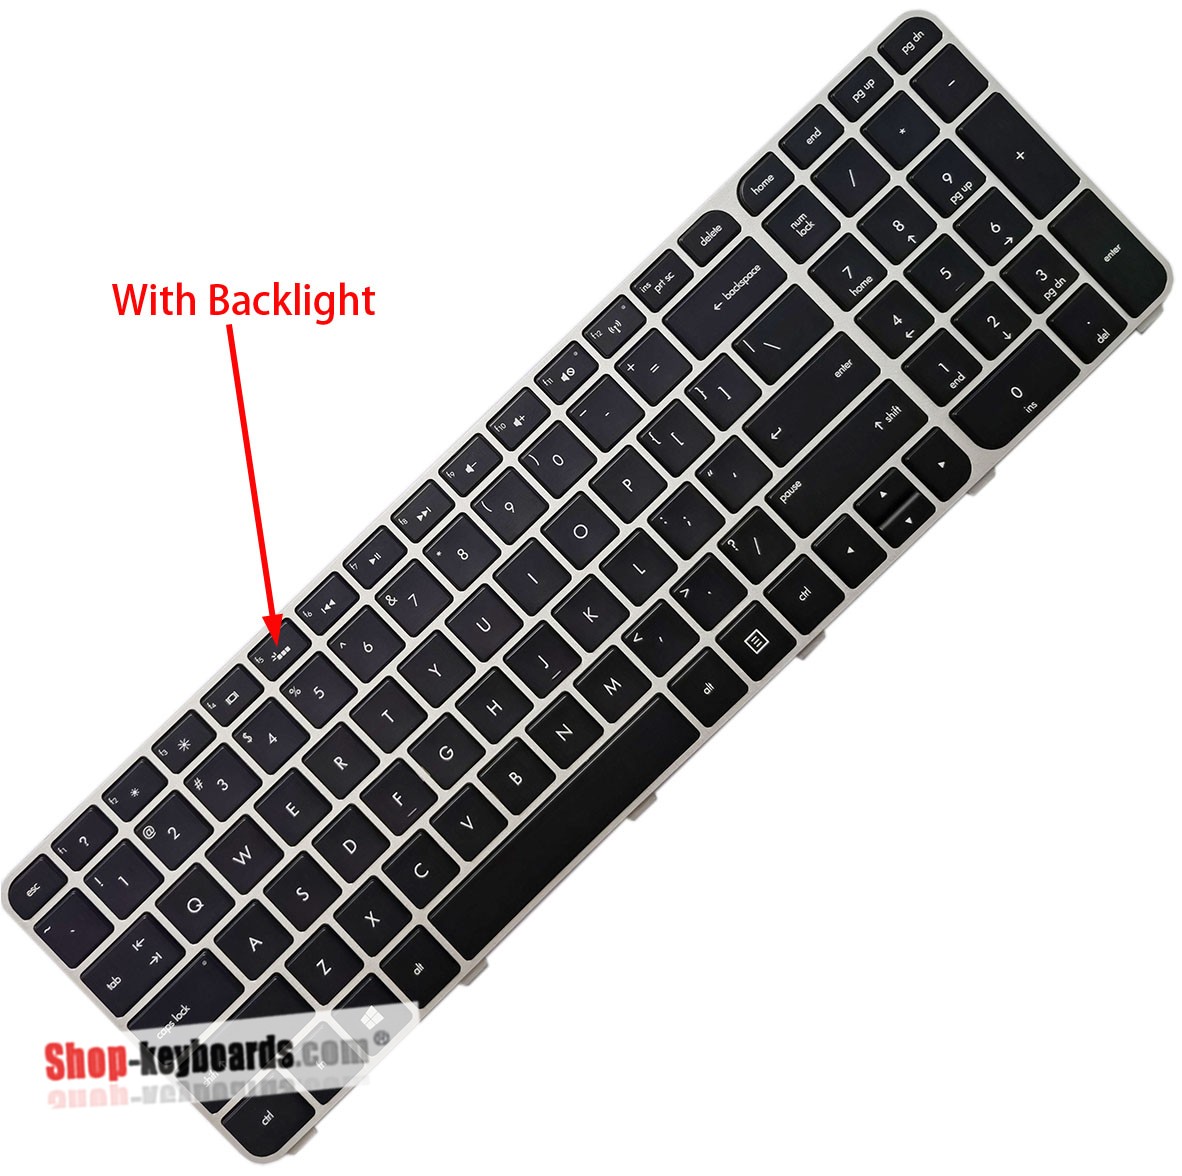 HP 681981-121 Keyboard replacement